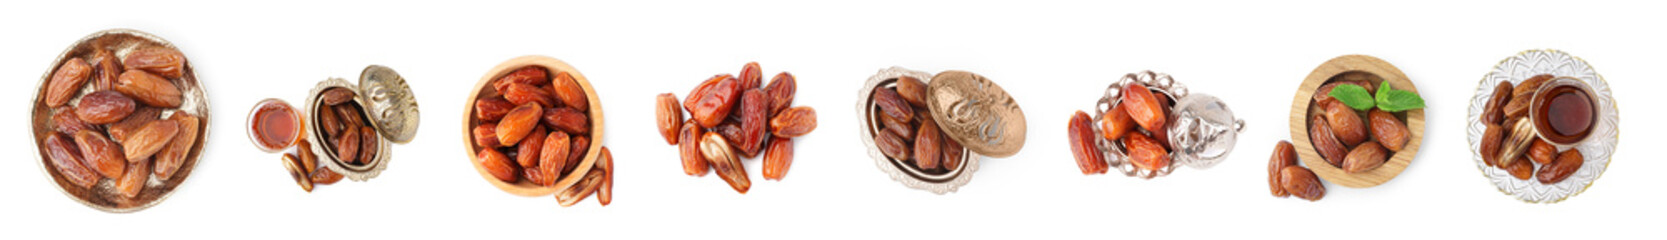 Set of dried dates on white background, top view